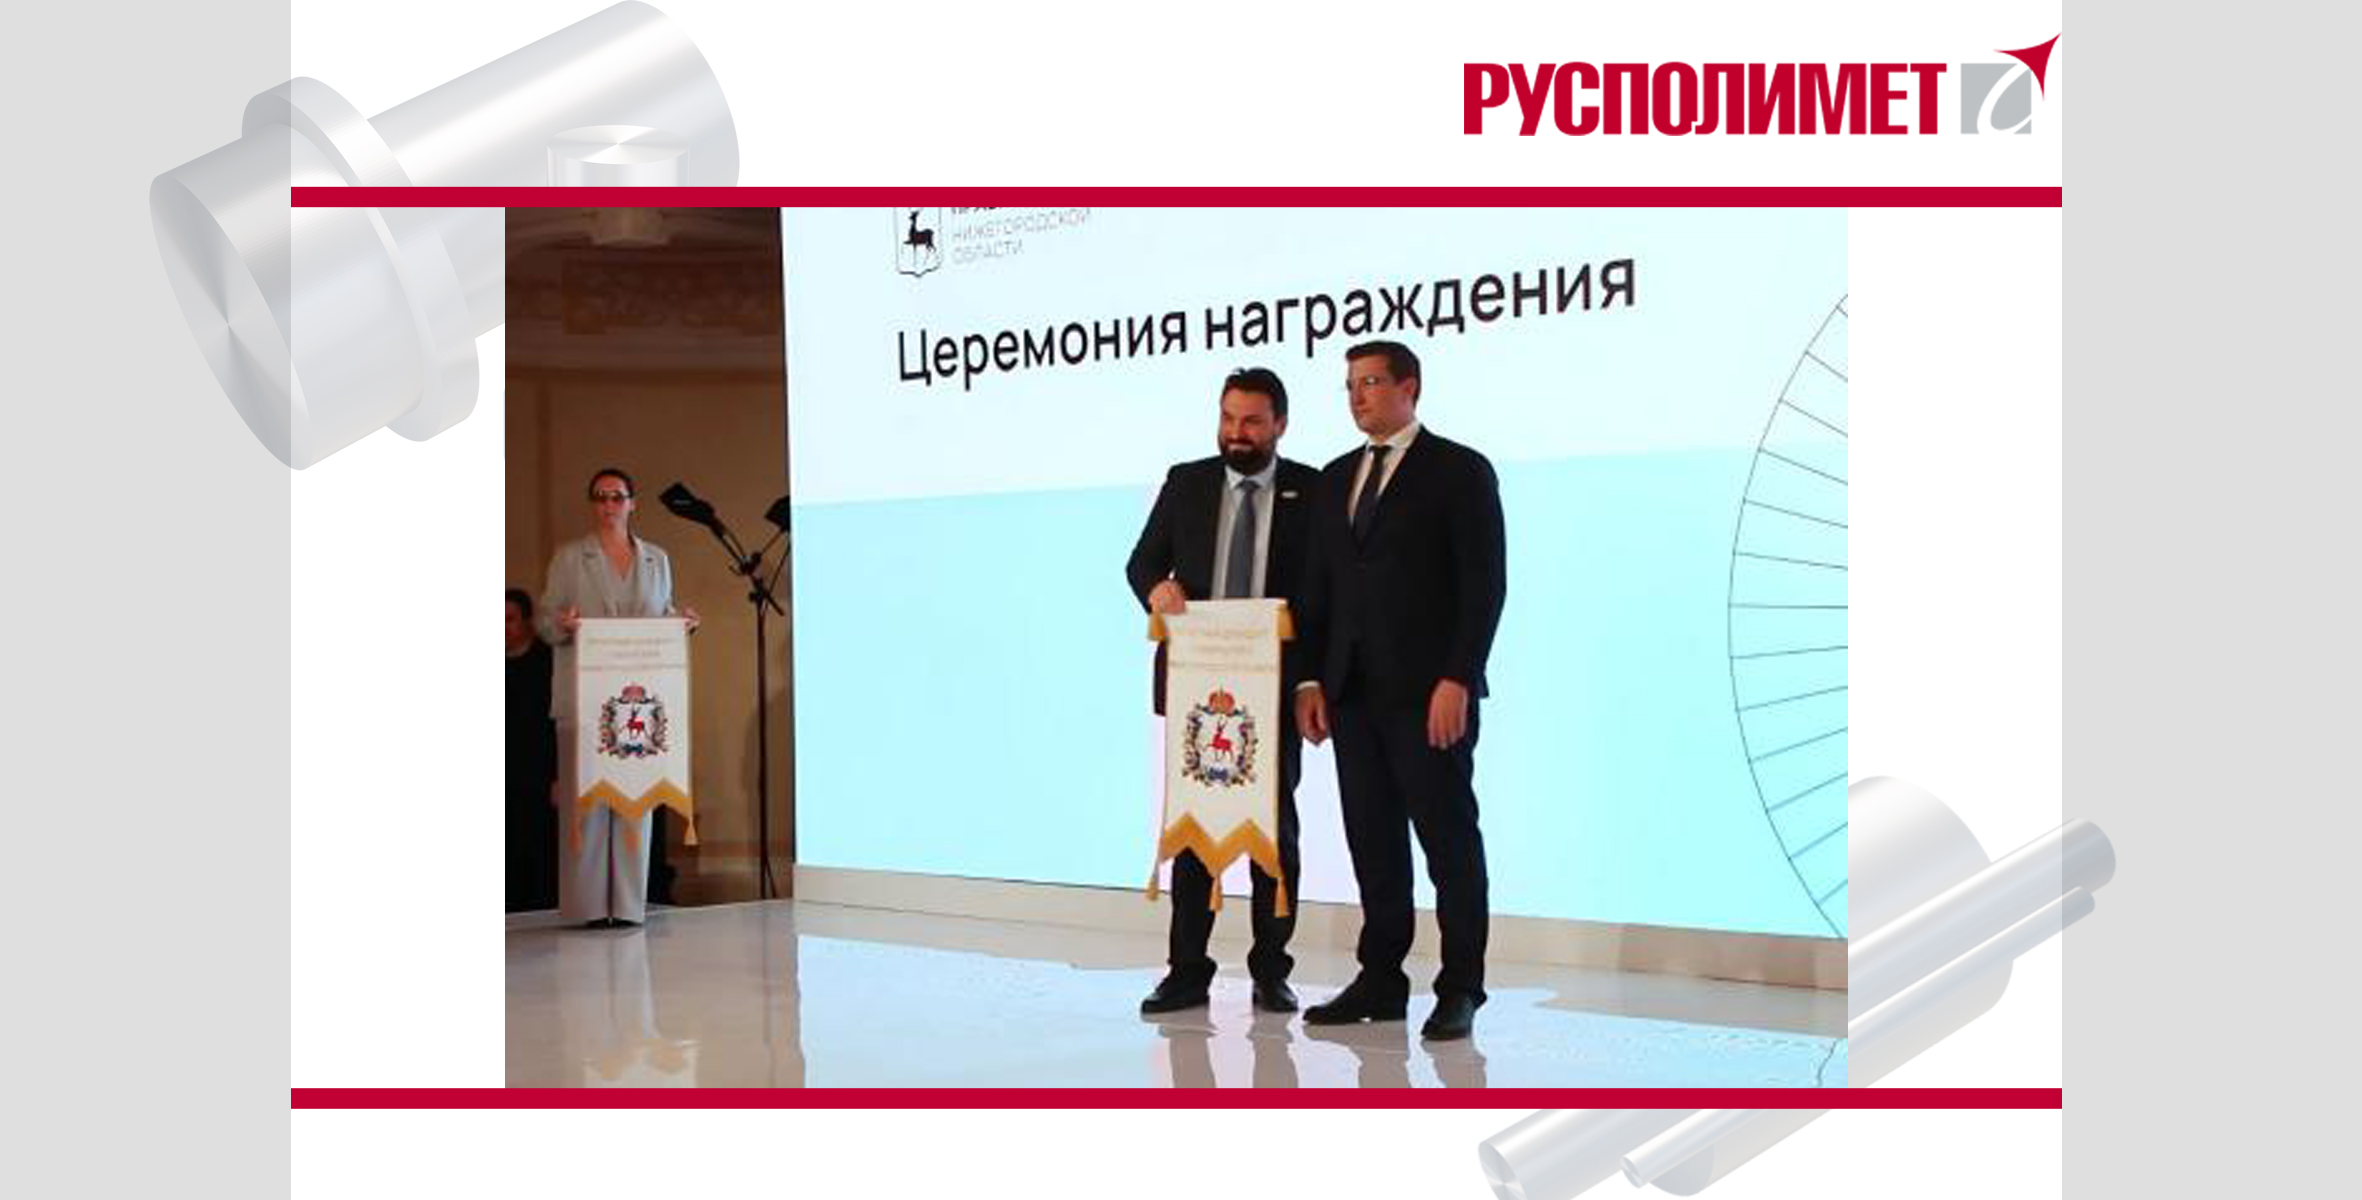 RUSPOLIMET WAS AWARDED THE HONORARY STANDARD OF THE GOVERNOR